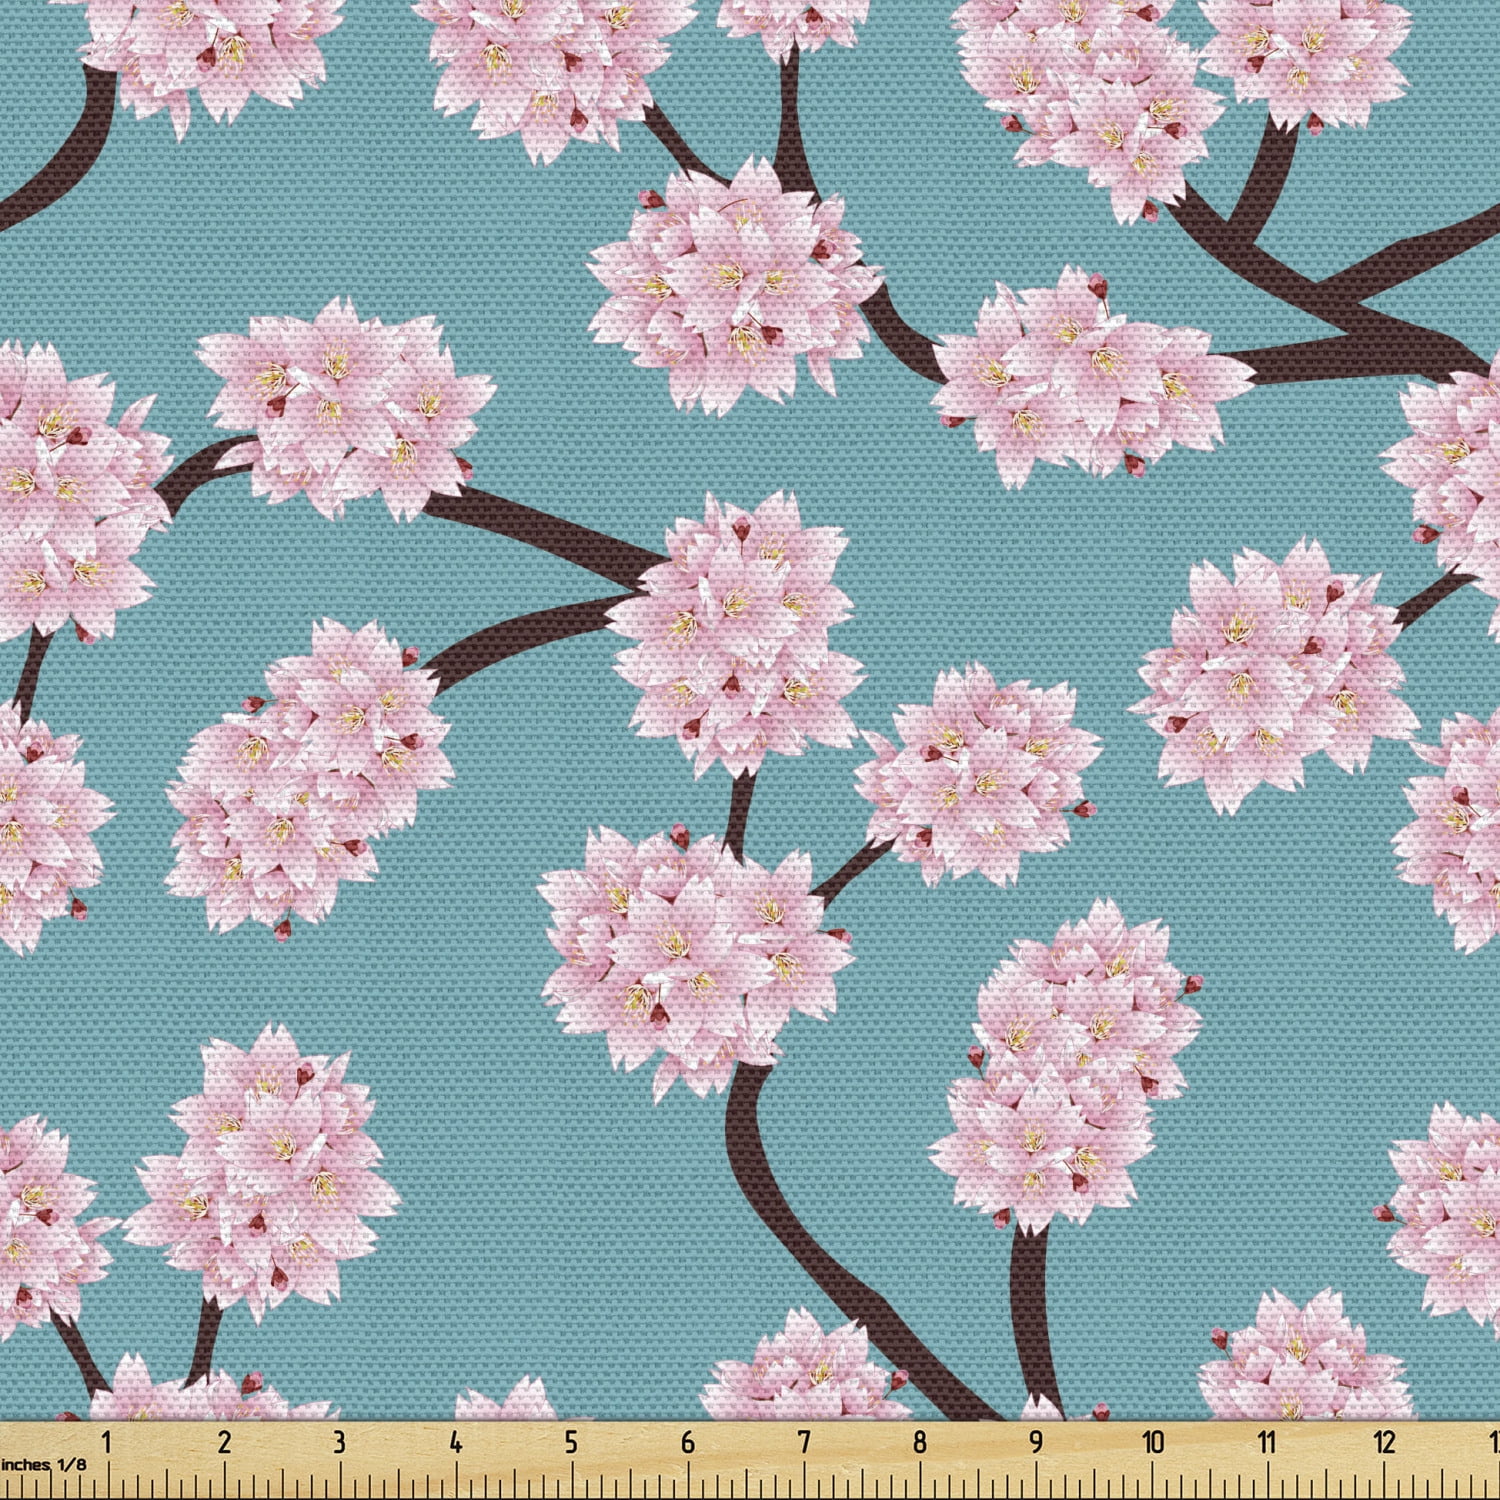 Flowers Cherries Clovers Glitter Cotton BTY New Sewing Fabric Material